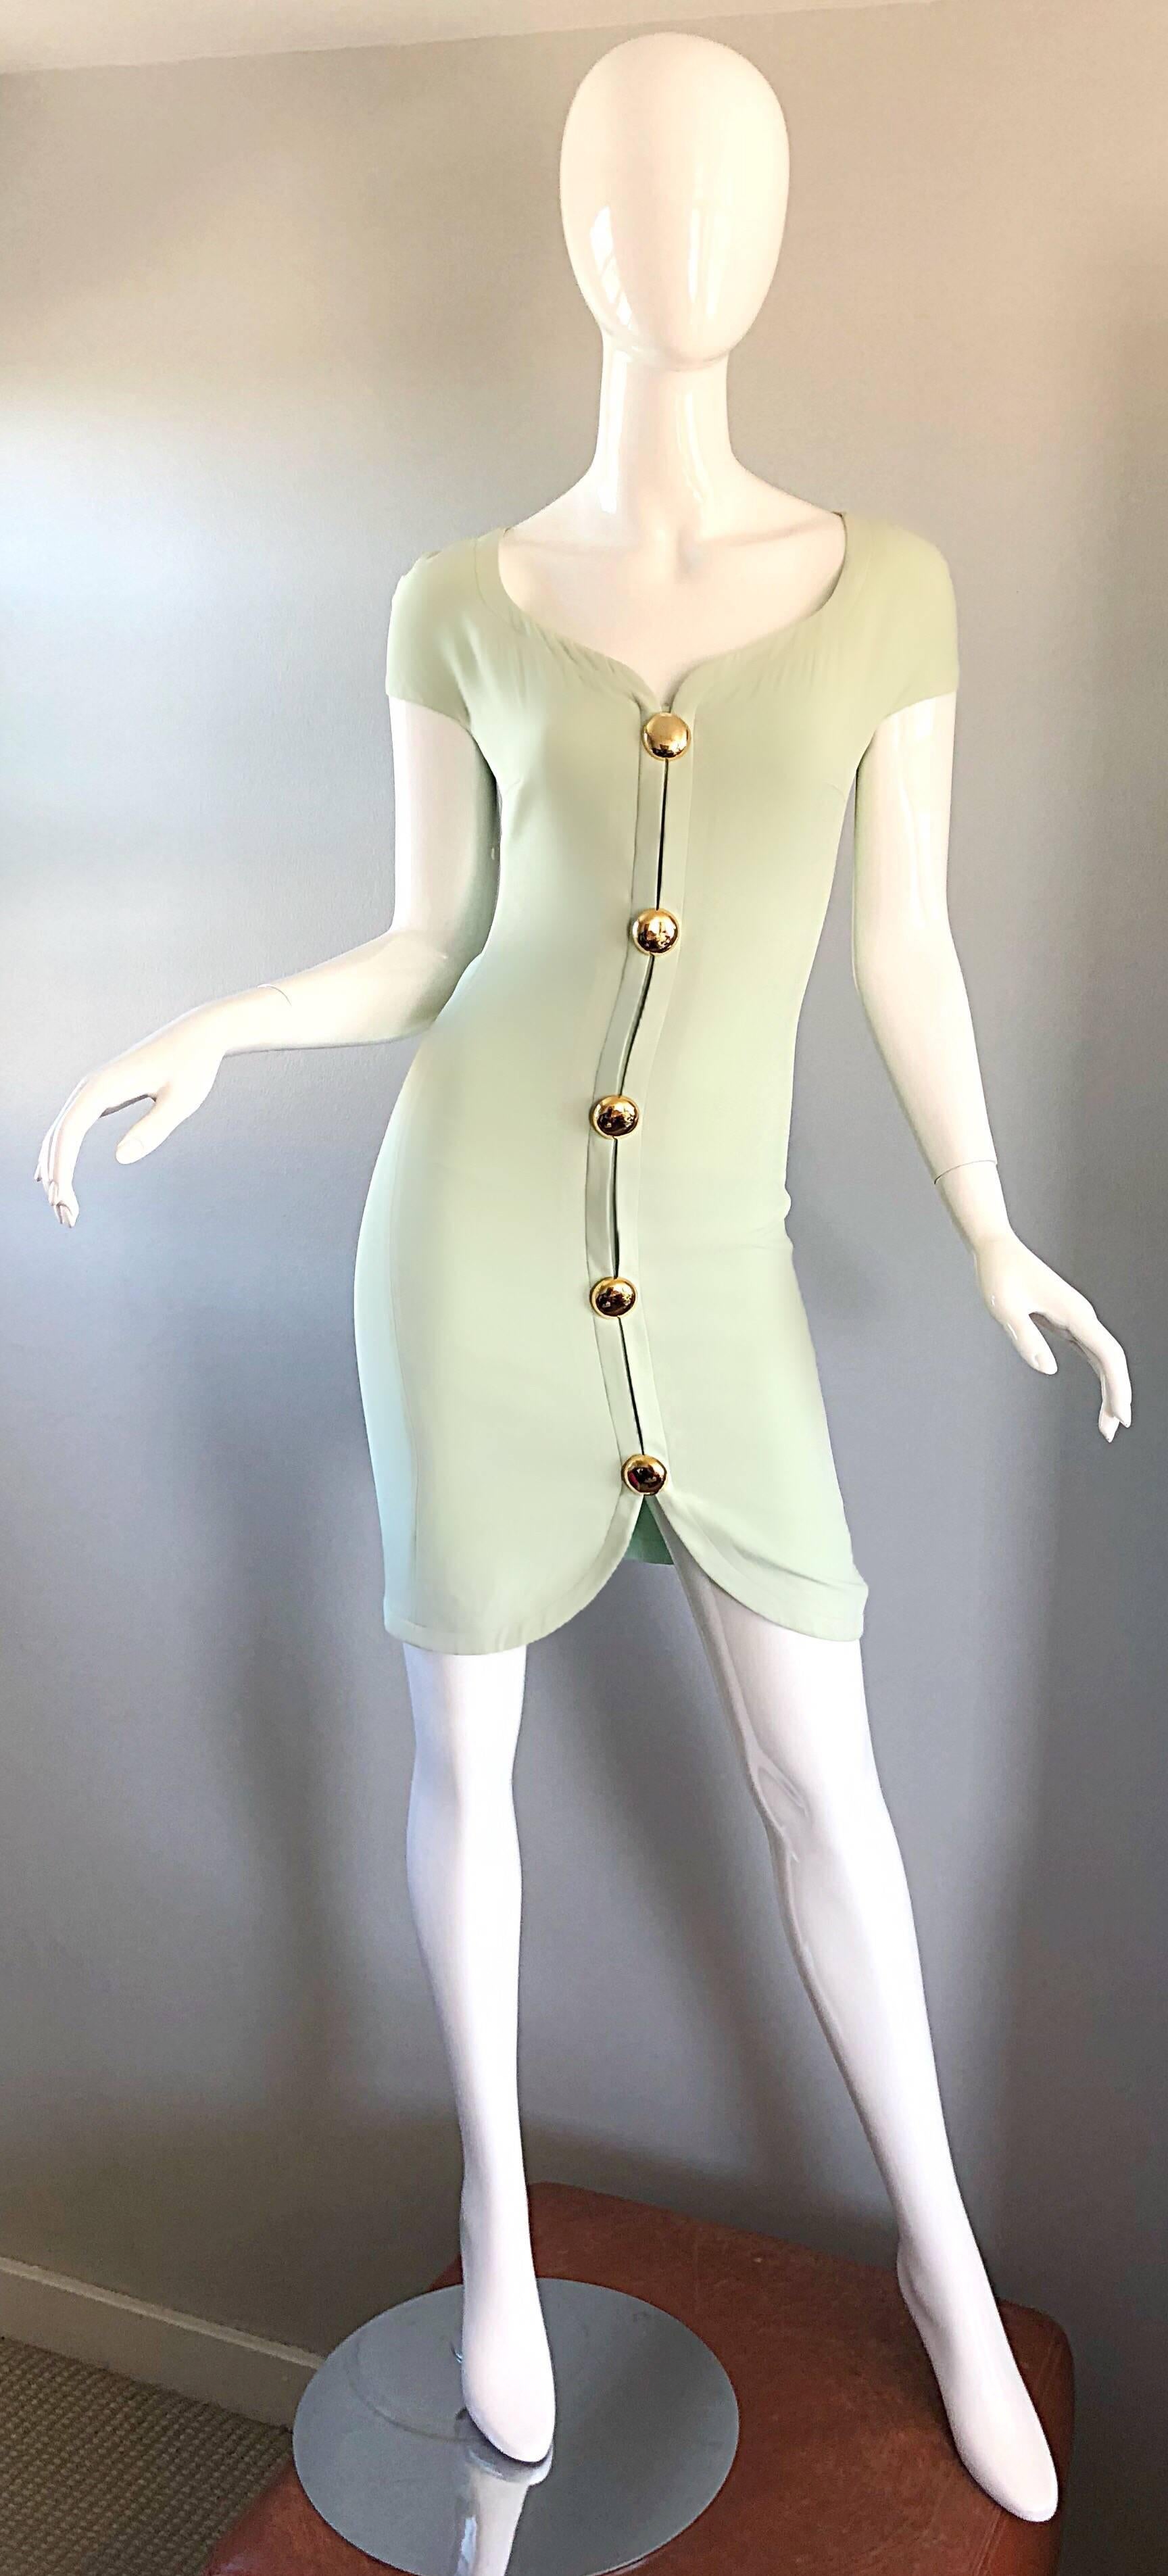 Sexy brand new with original tags vintage GIANNI VERSACE for GENNY pale mint green bodcon dress! Features a body hugging fit. Large round gold buttons up the front bodice. 
Soft rayon blend fabric. Sweetheart neckline. Perfect for any day or evening